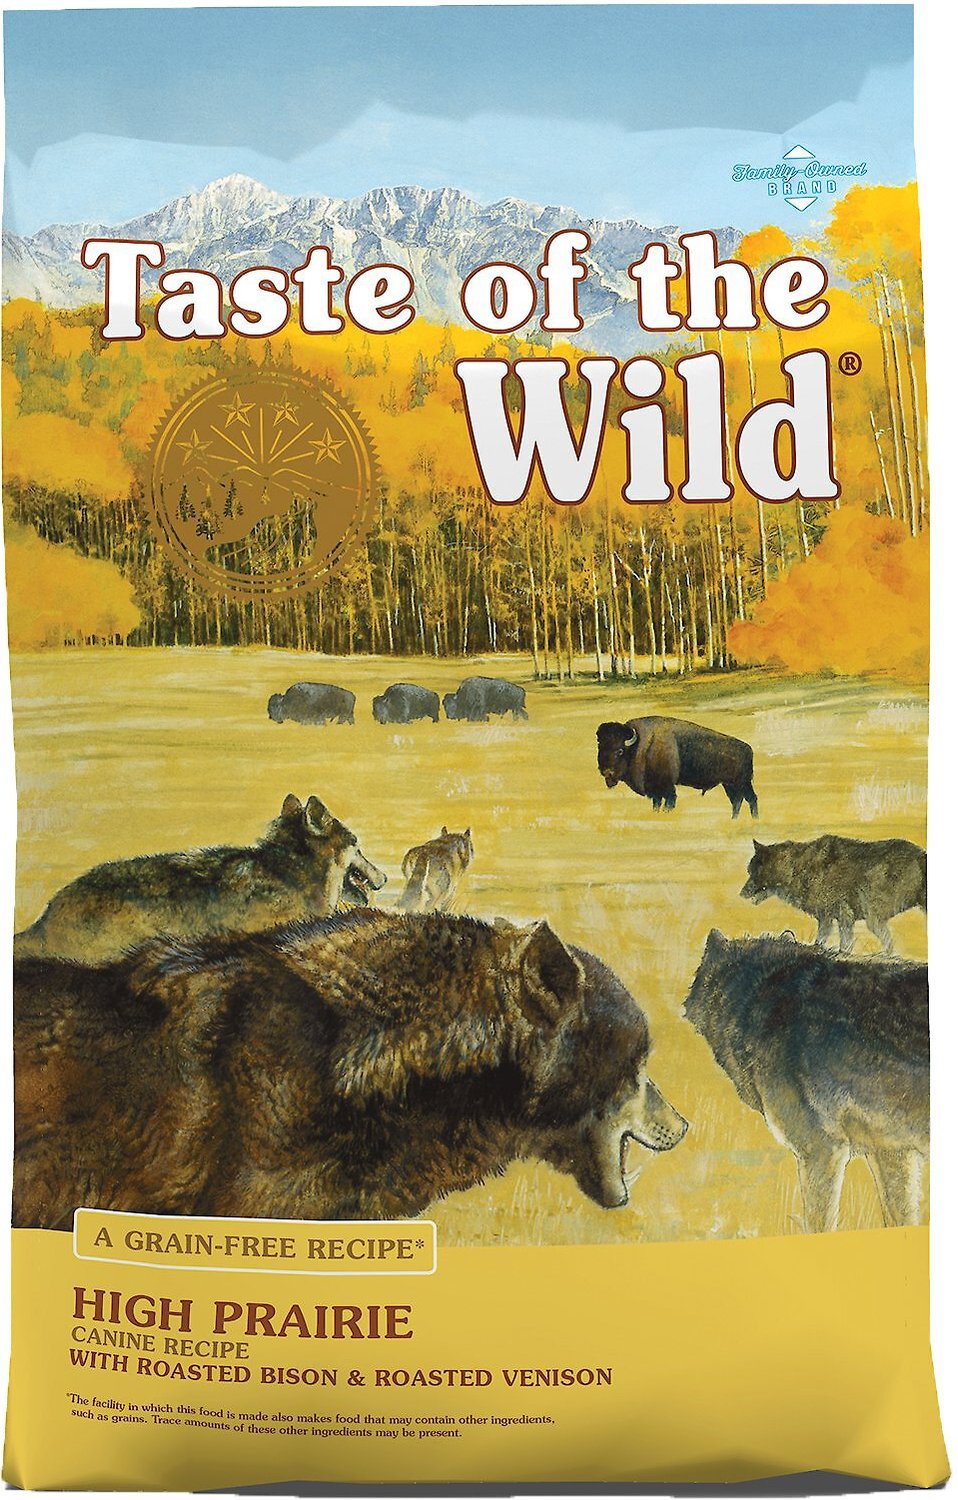 Taste of the Wild Southwest Canyon Grain-Free Dry Dog Food FREE SHIPPING